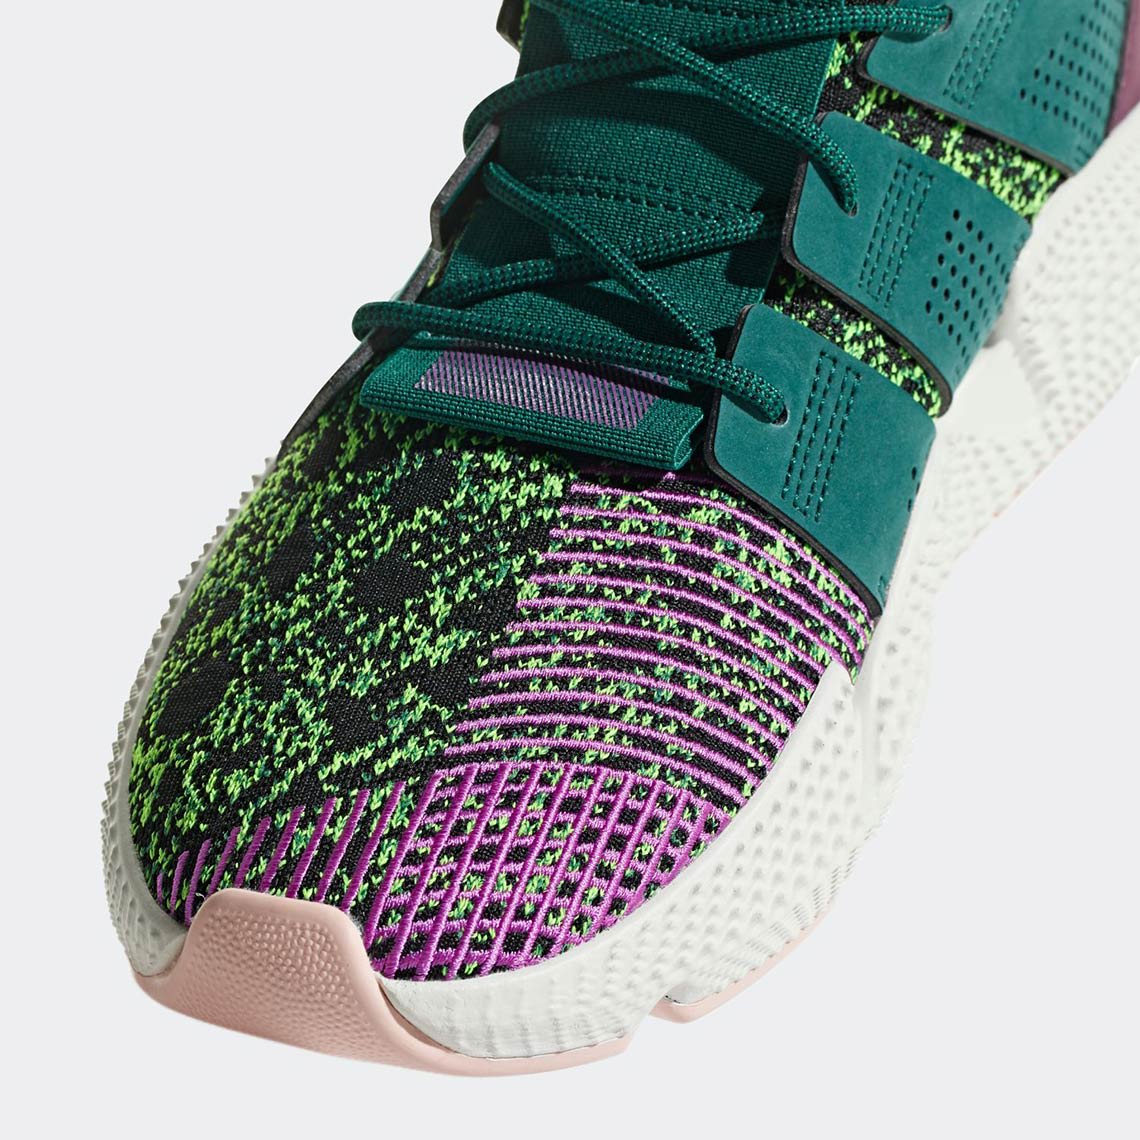 Dragon Ball Z x Adidas Prophere Cell Release Date D97053 Toe